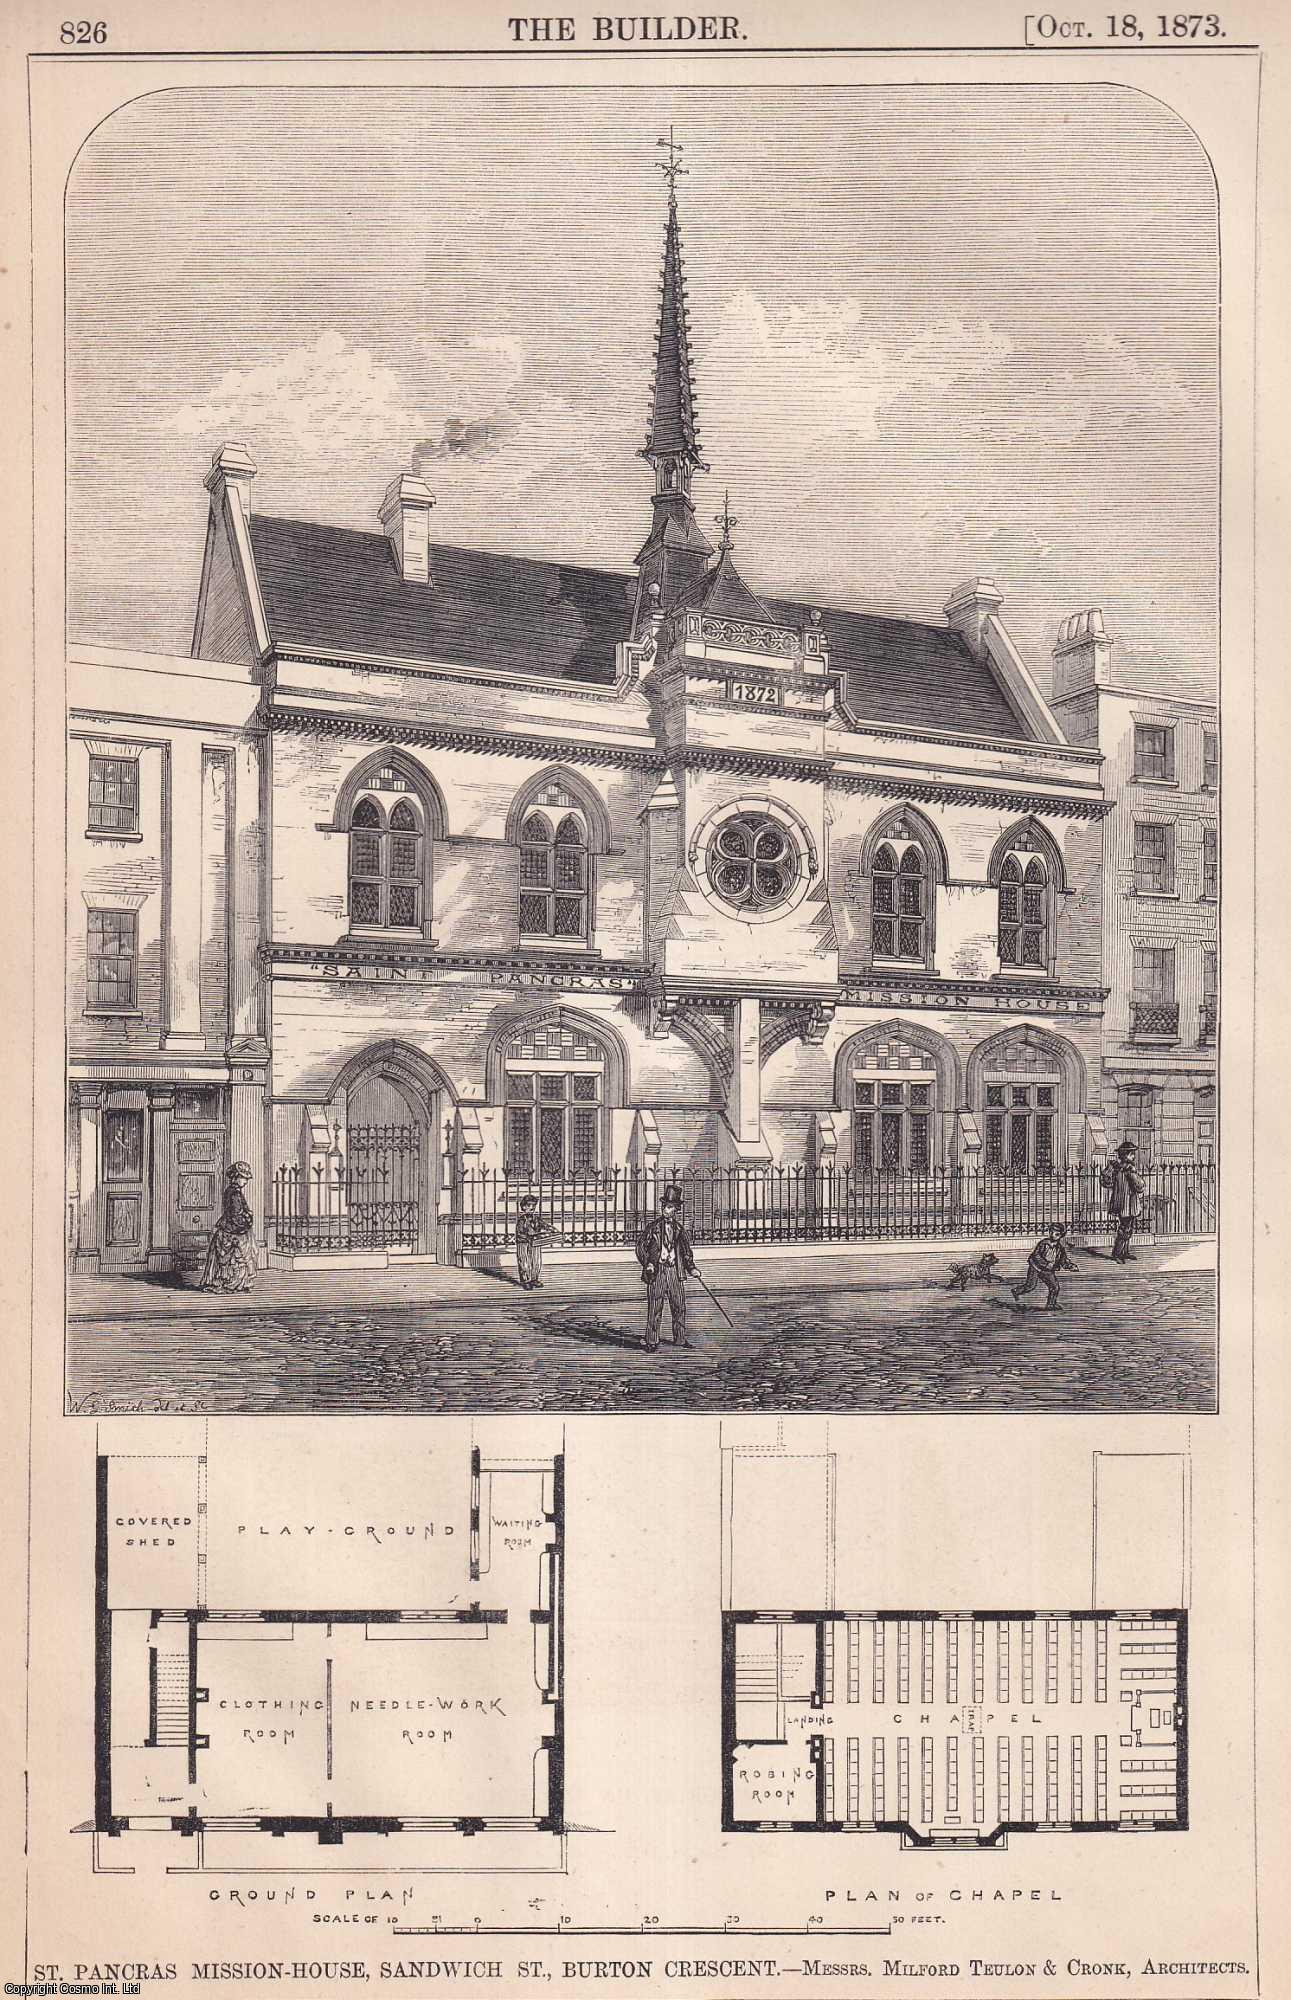 ST PANCRAS MISSION-HOUSE - 1873 : St. Pancras Mission-House, Sandwich St., Burton Crescent. Messrs. Milford Teulon & Cronk, Architects. An original page from The Builder. An Illustrated Weekly Magazine, for the Architect, Engineer, Archaeologist, Constructor, & Art-Lover.